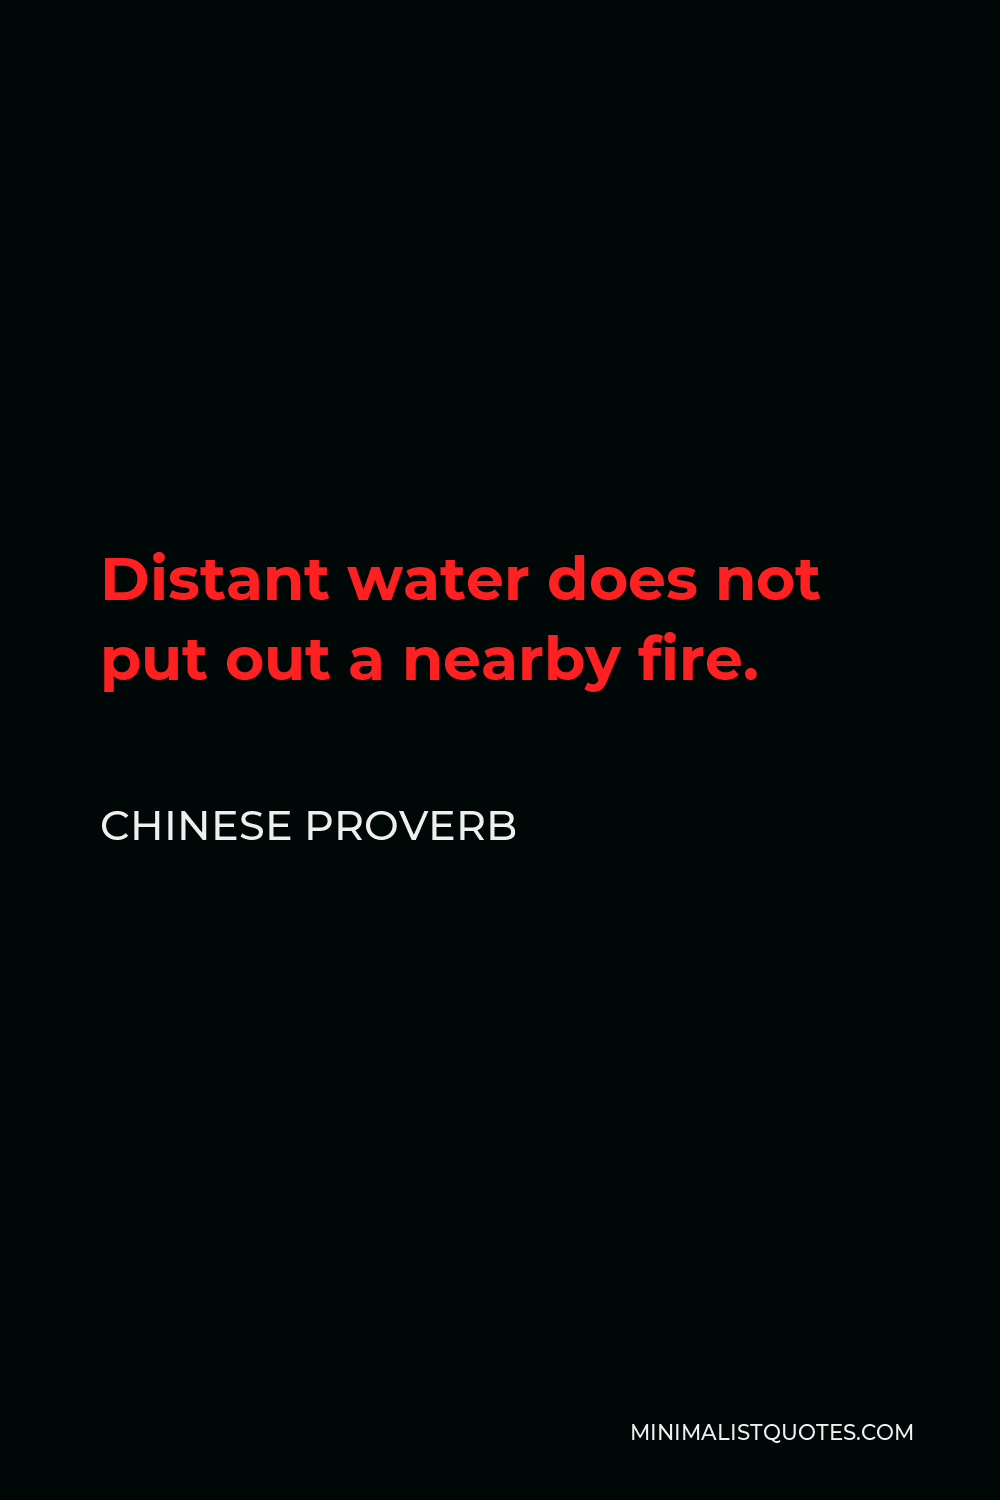 Chinese Proverb Quote - Distant water does not put out a nearby fire.